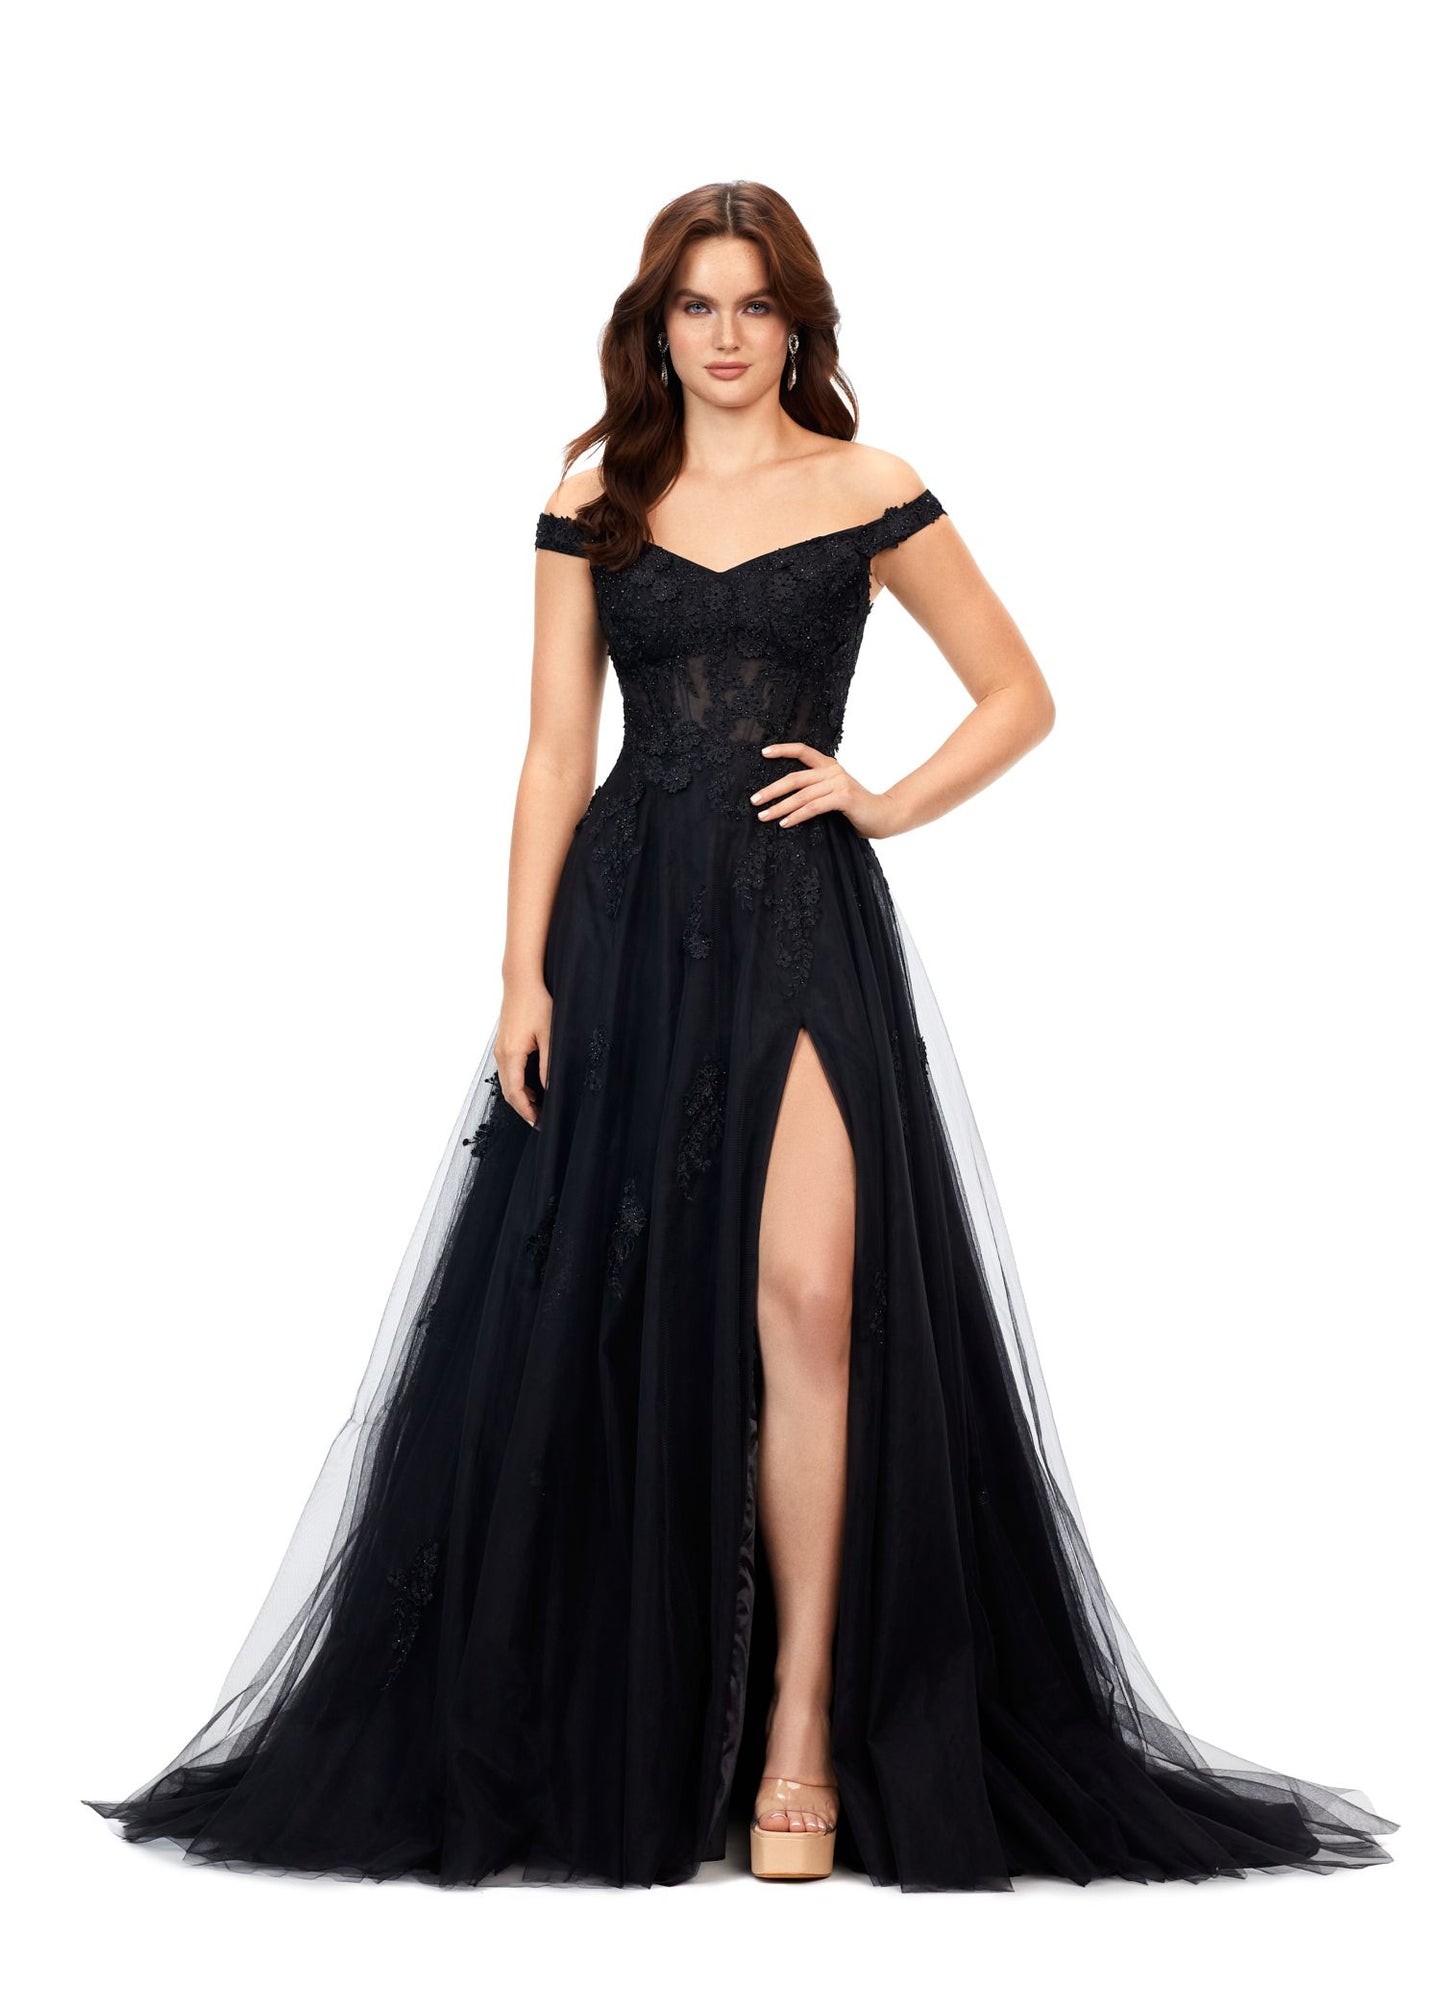 Ashley Lauren 11376 This off the shoulder fairytail dream gown features an illusion corset and 3-dimensional lace flower appliques throughout layers of tulle. The look is complete with a left leg slit. Off Shoulder Neckline Illusion Bodice 3-Dimensional Lace Flower Appliques Tulle Black, Pink